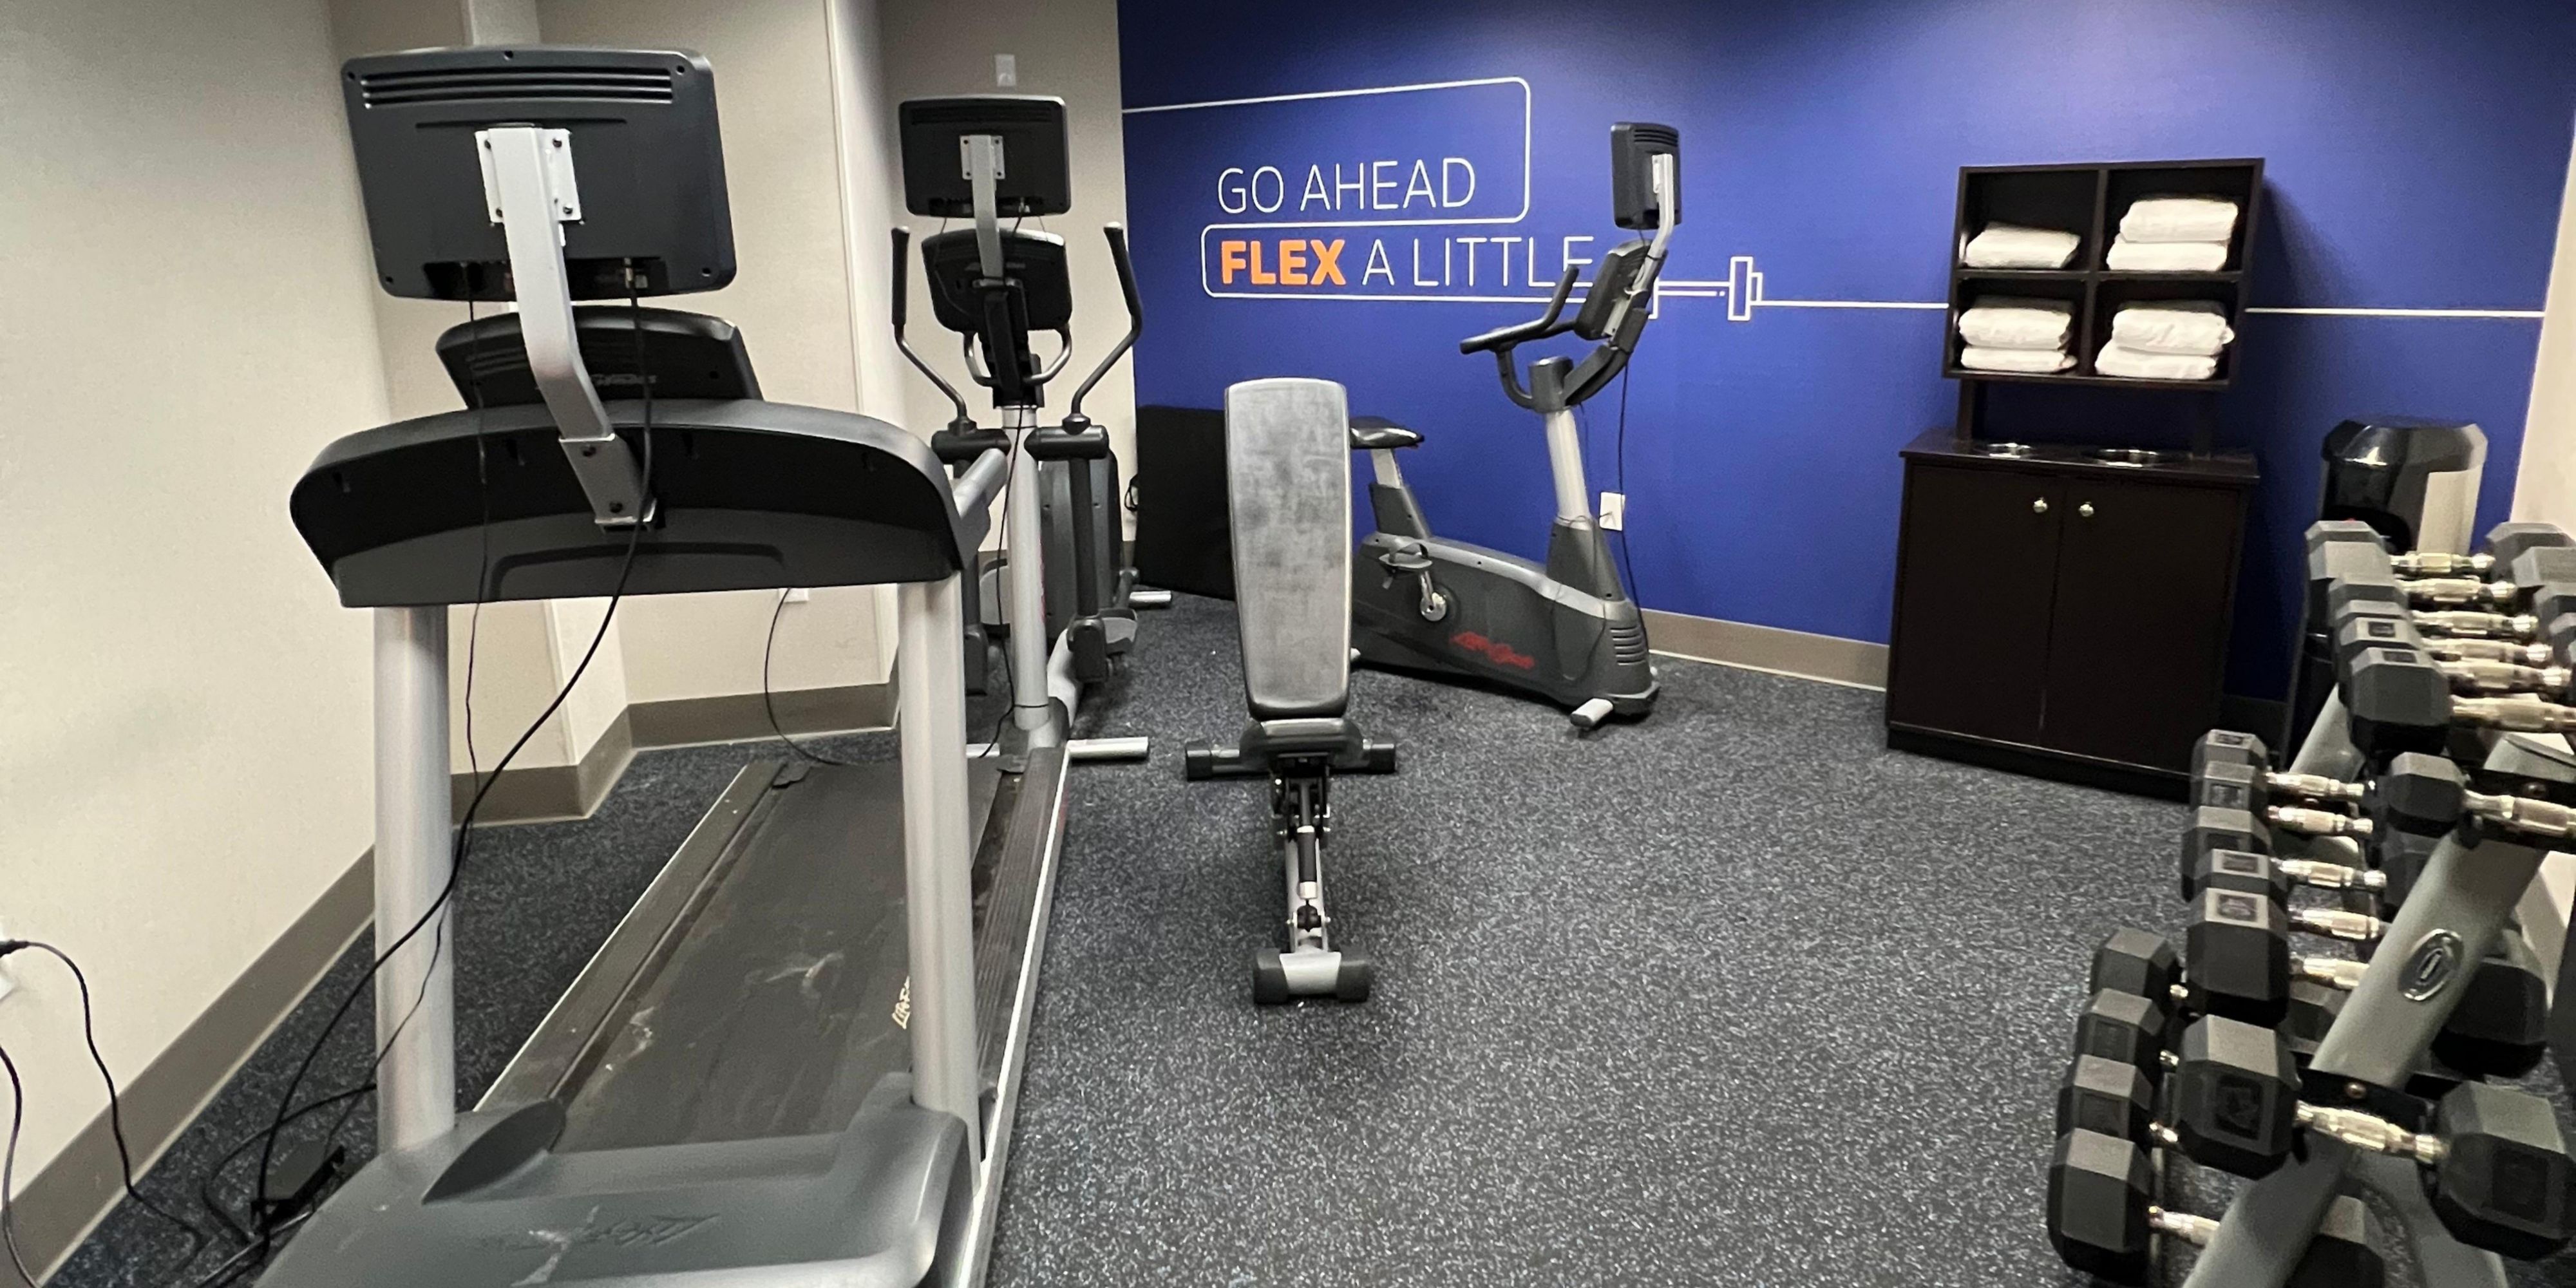 Get your sweat on in our 24-hour complimentary, fully equipped Fitness Center with treadmill, elliptical, recumbent bike and free weights.